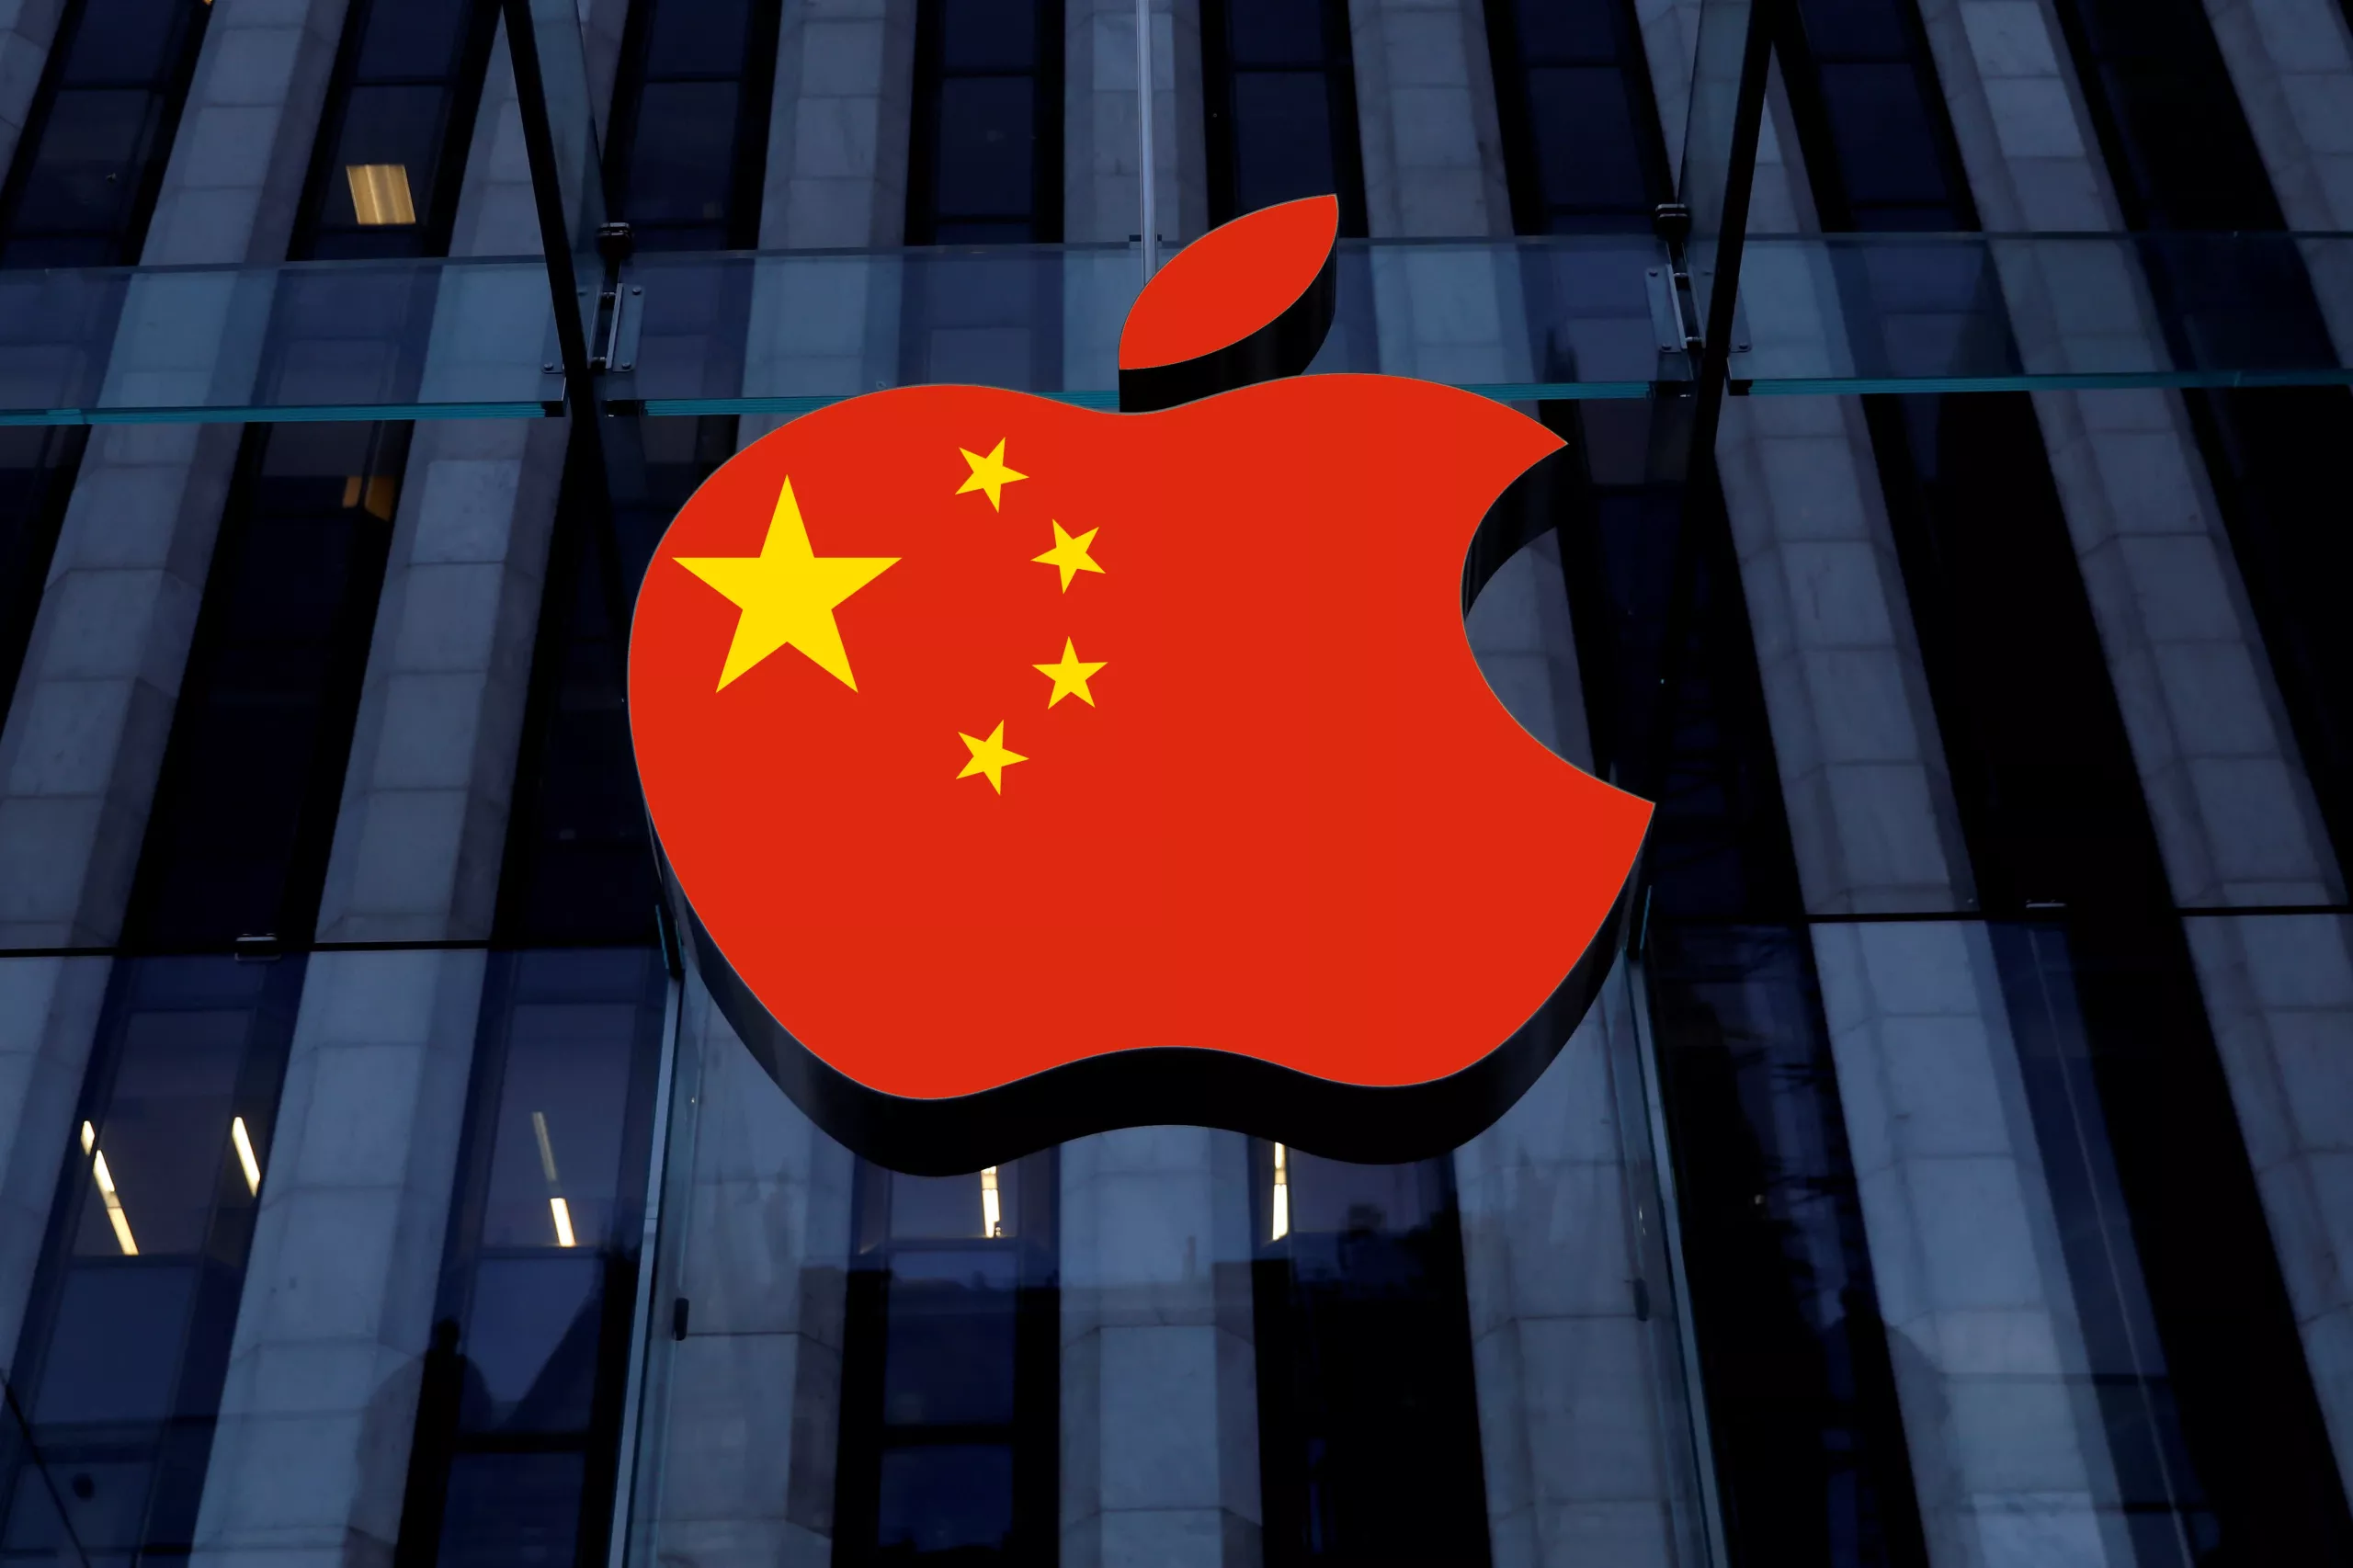 Apple restricts AirDrop transfers from non-contacts to 10 minutes in China amid government protests